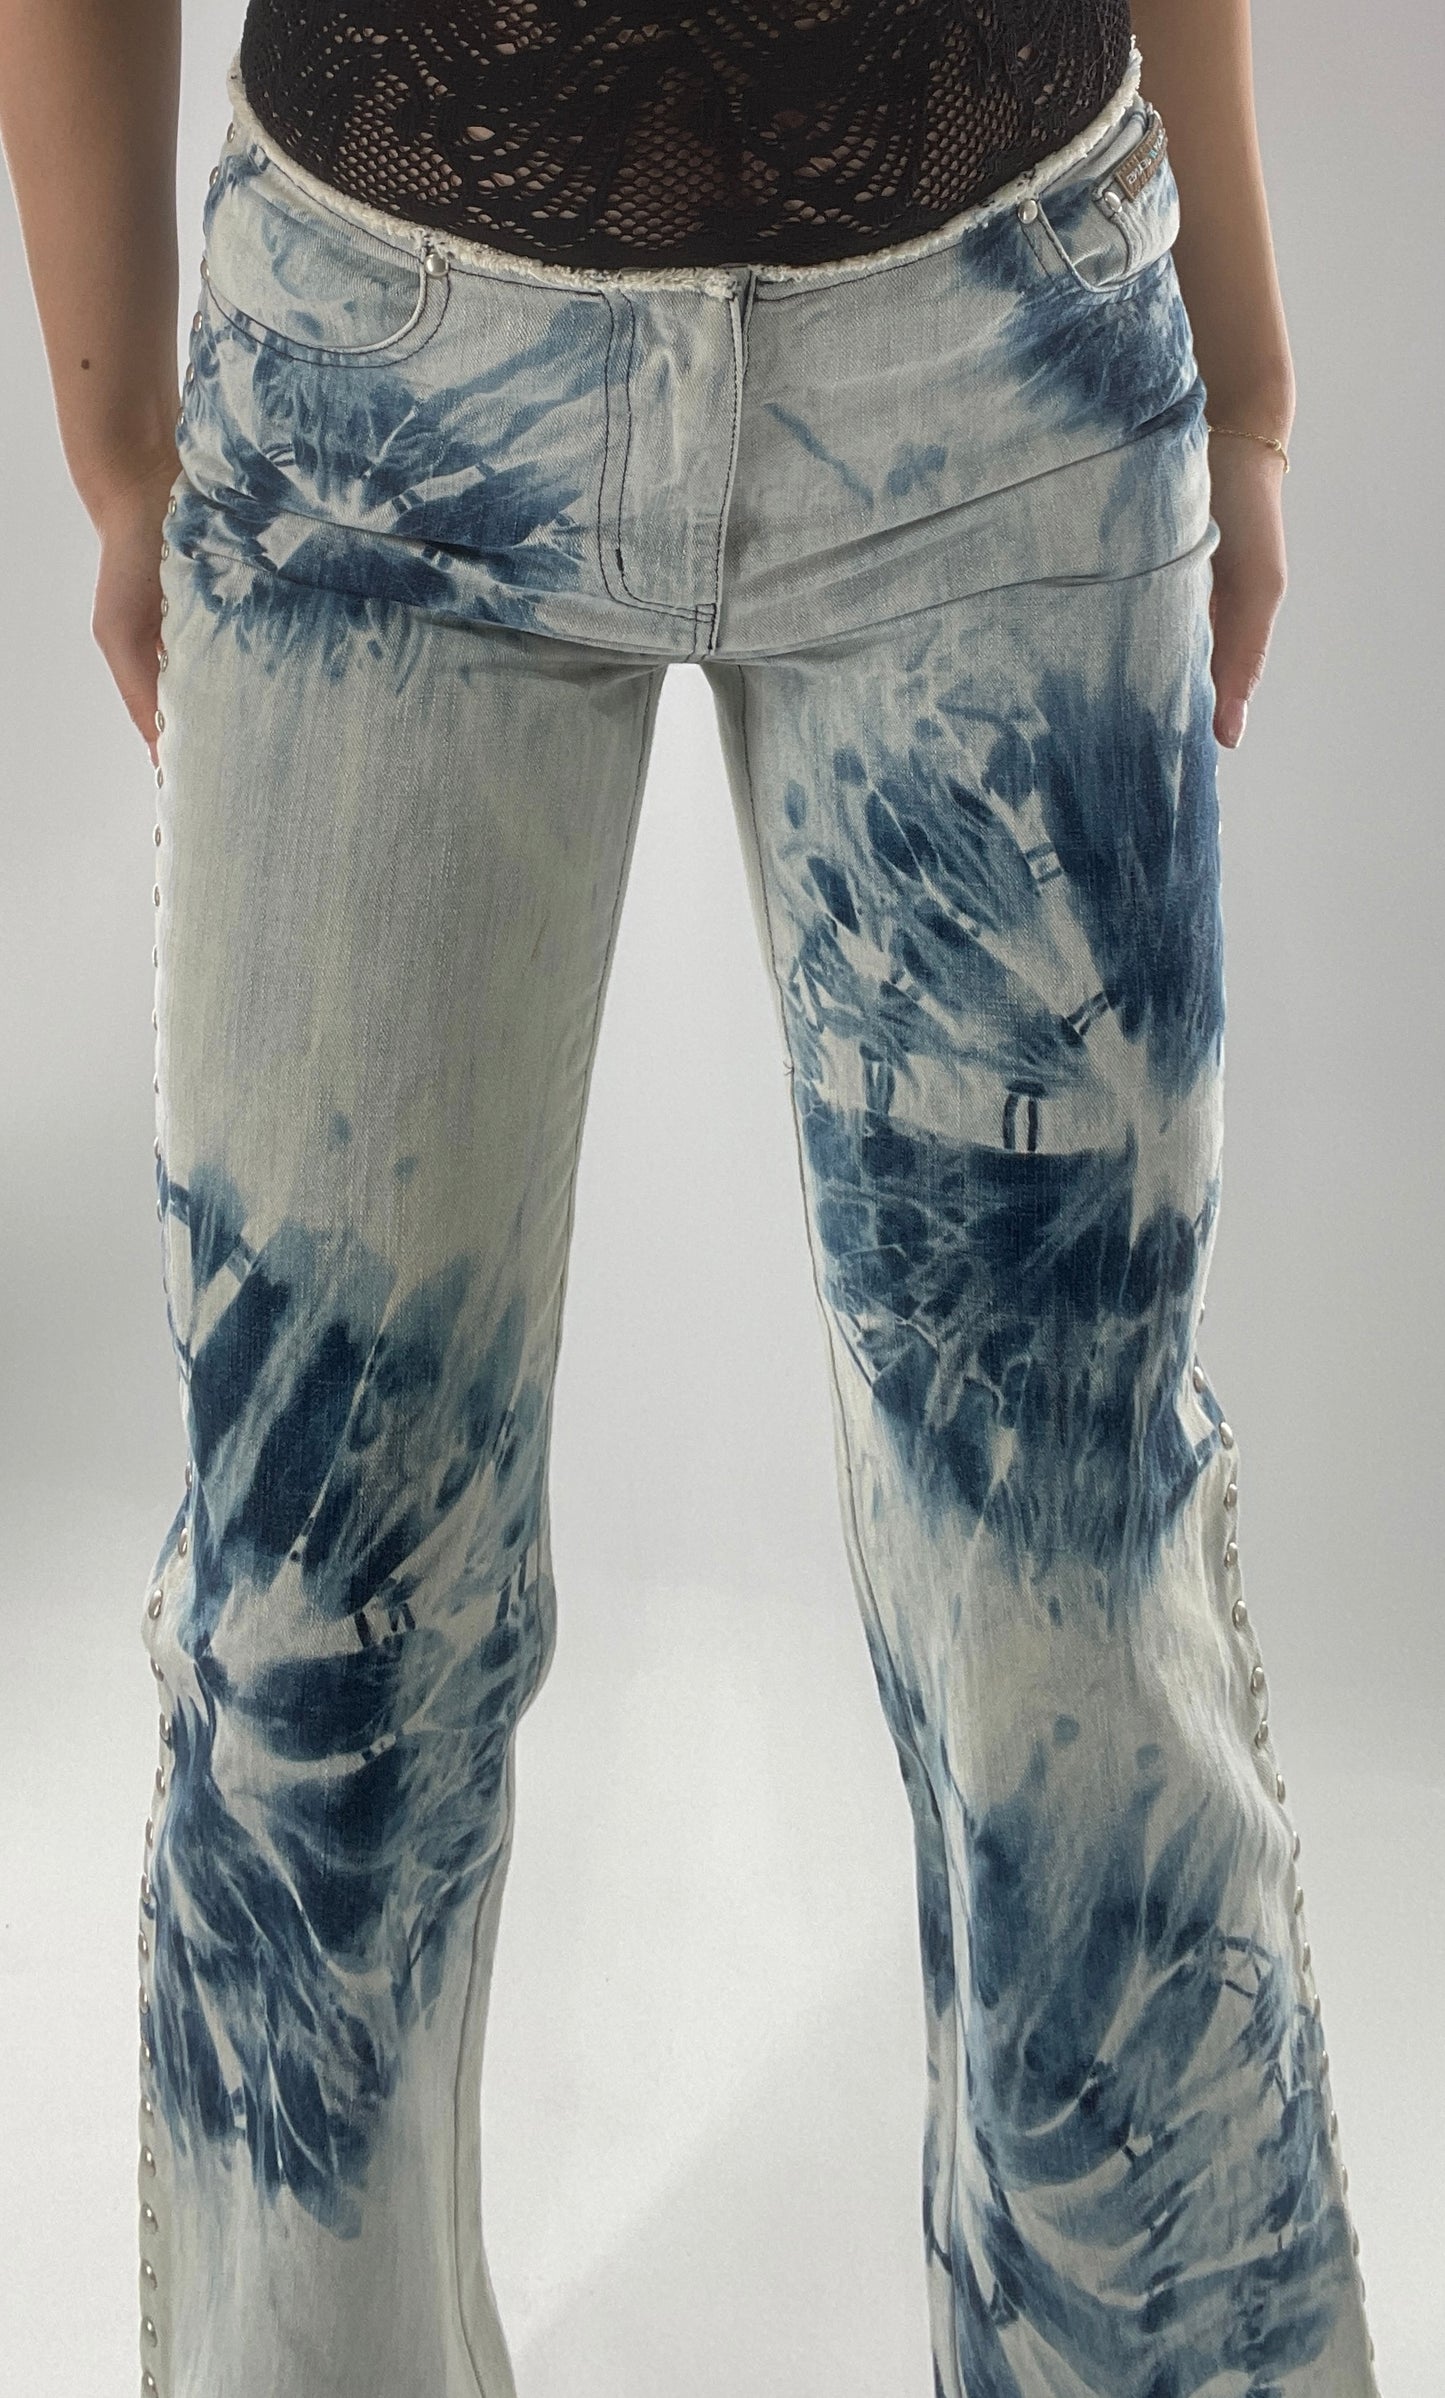 Vintage 1990s DKNY Light Bleached Jeans with Tie Dye Denim Pattern, Raw Edge Low Rise, and Studded Sides (5)